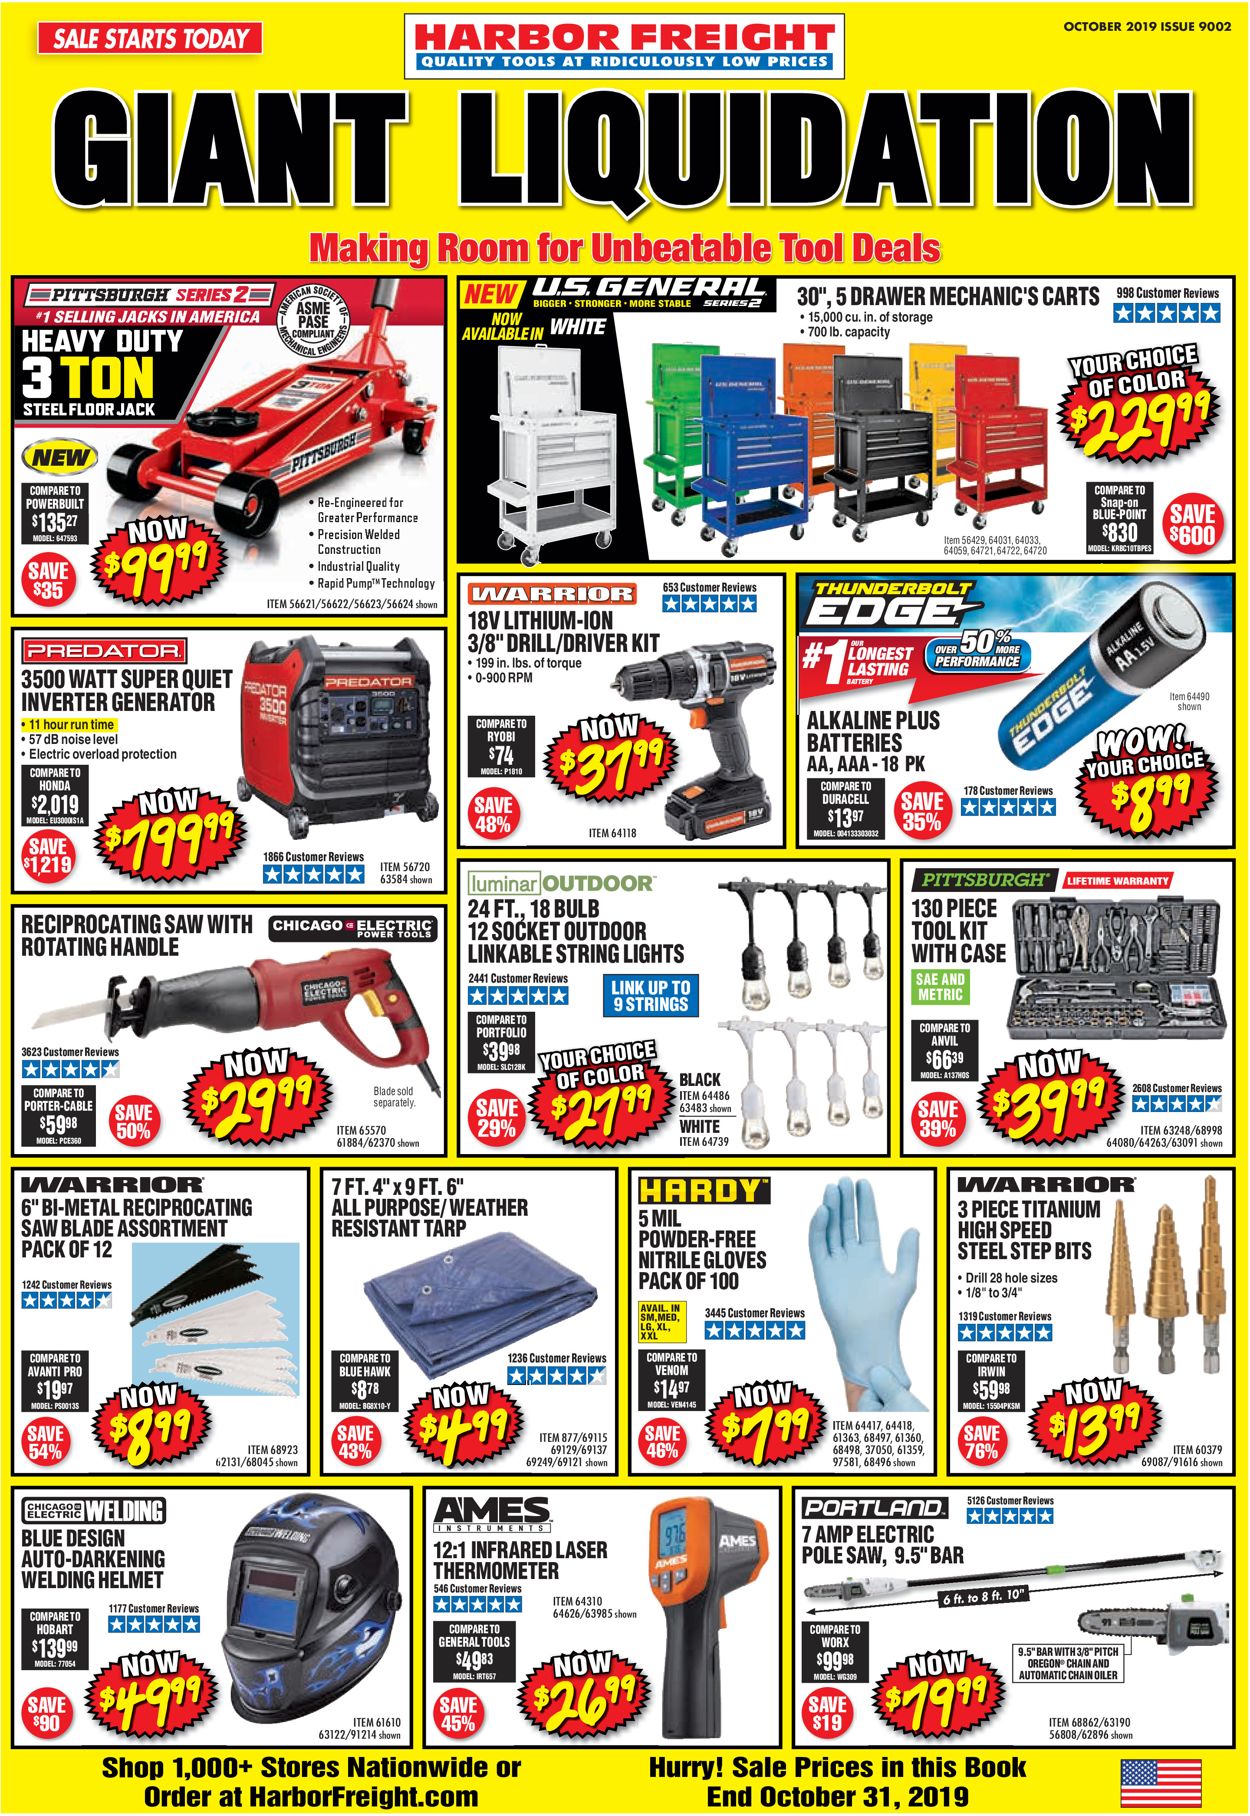 Harbor Freight Current weekly ad 10/01 - 10/31/2019 - frequent-ads.com